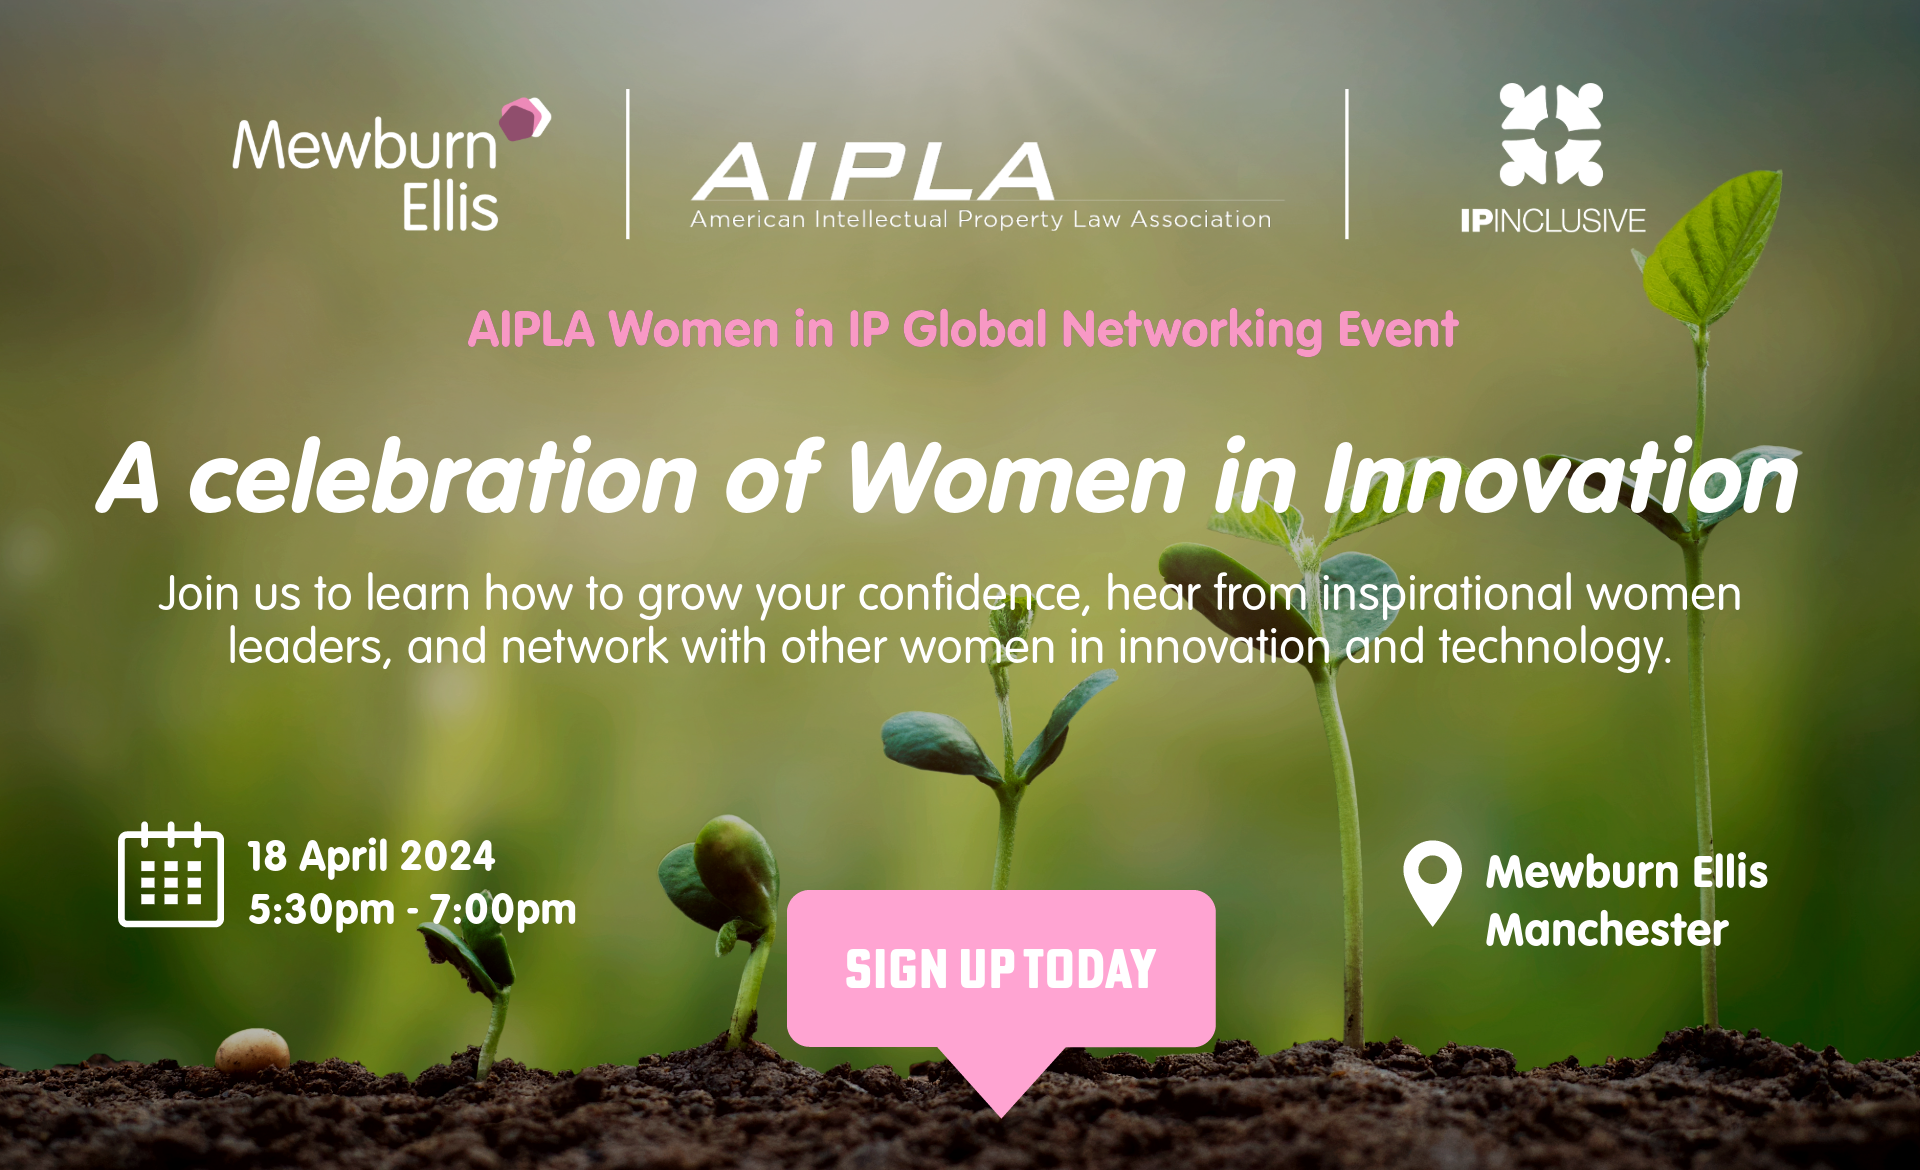 Women in IP Global Networking Event 18 April 2024